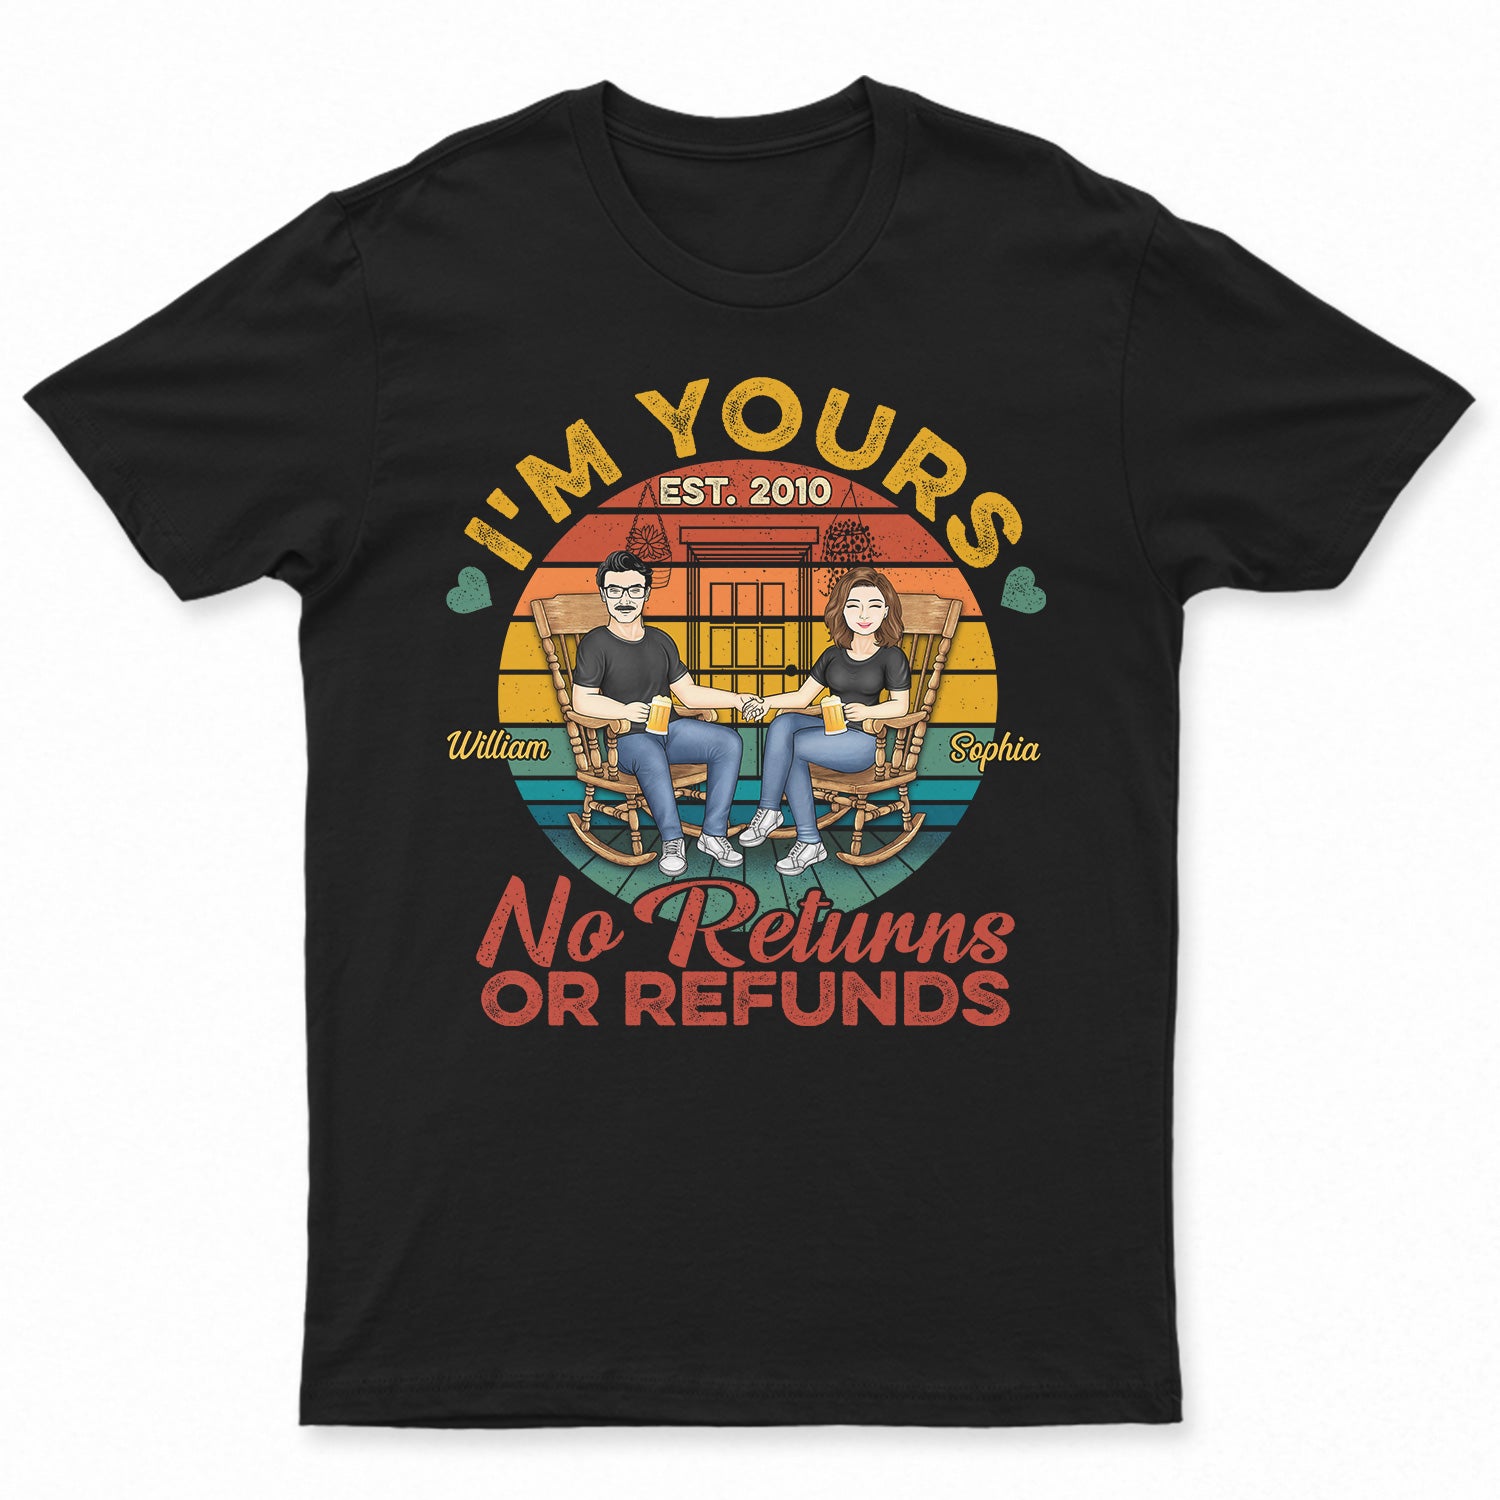 I‘m Yours No Returns Or Refunds - Anniversary, Birthday Gift For Spouse, Lover, Husband, Wife, Boyfriend, Girlfriend, Couple - Personalized Custom T Shirt